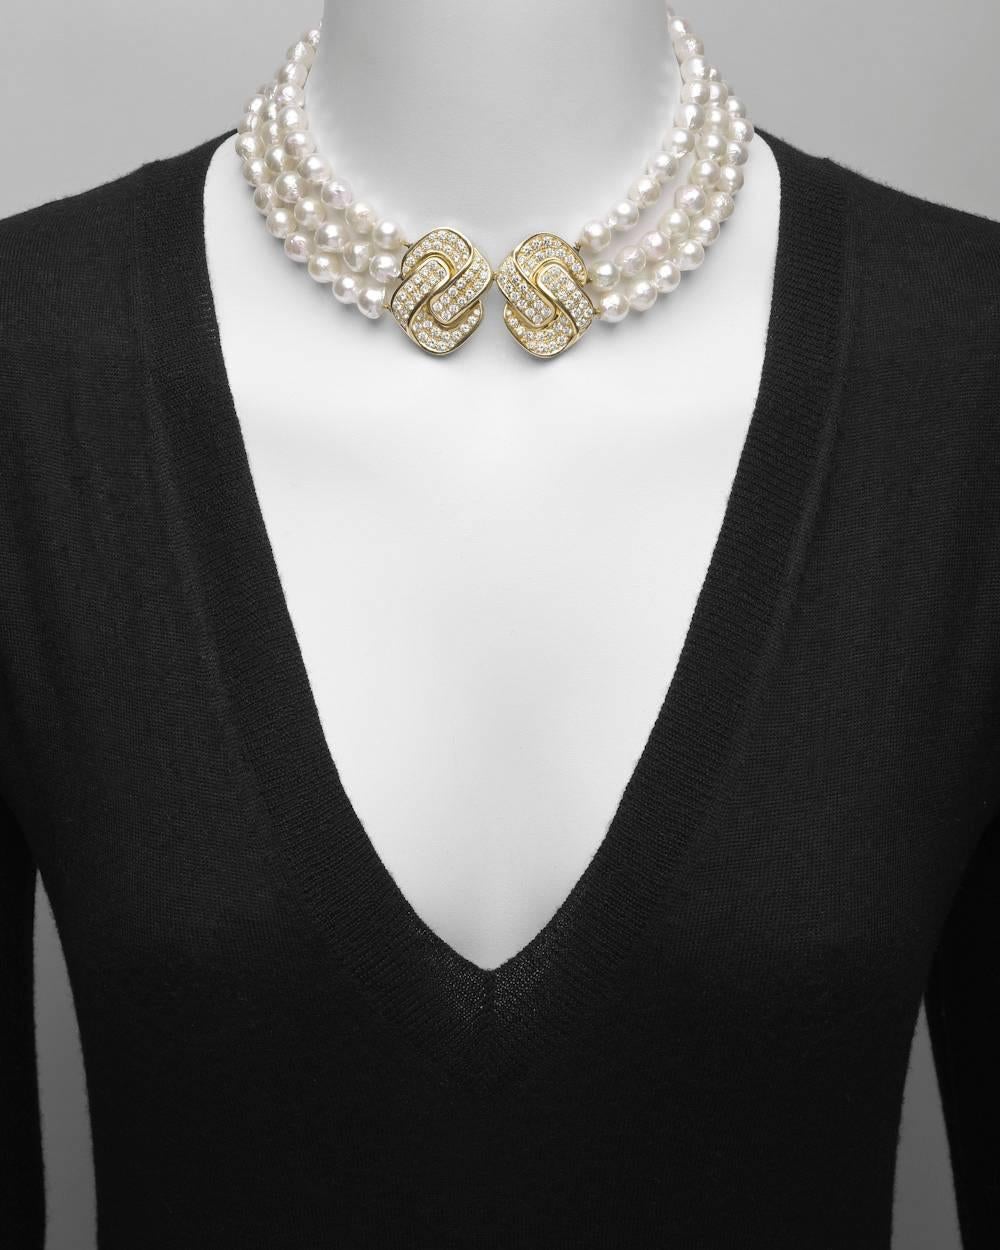 Baroque pearl collar necklace, designed with three strands of cultured baroque pearls measuring 8.5 to 9mm in diameter, strung on hand-knotted silk cord and secured by a stylized geometric knot-motif pavé diamond double clasp in 18k yellow gold.